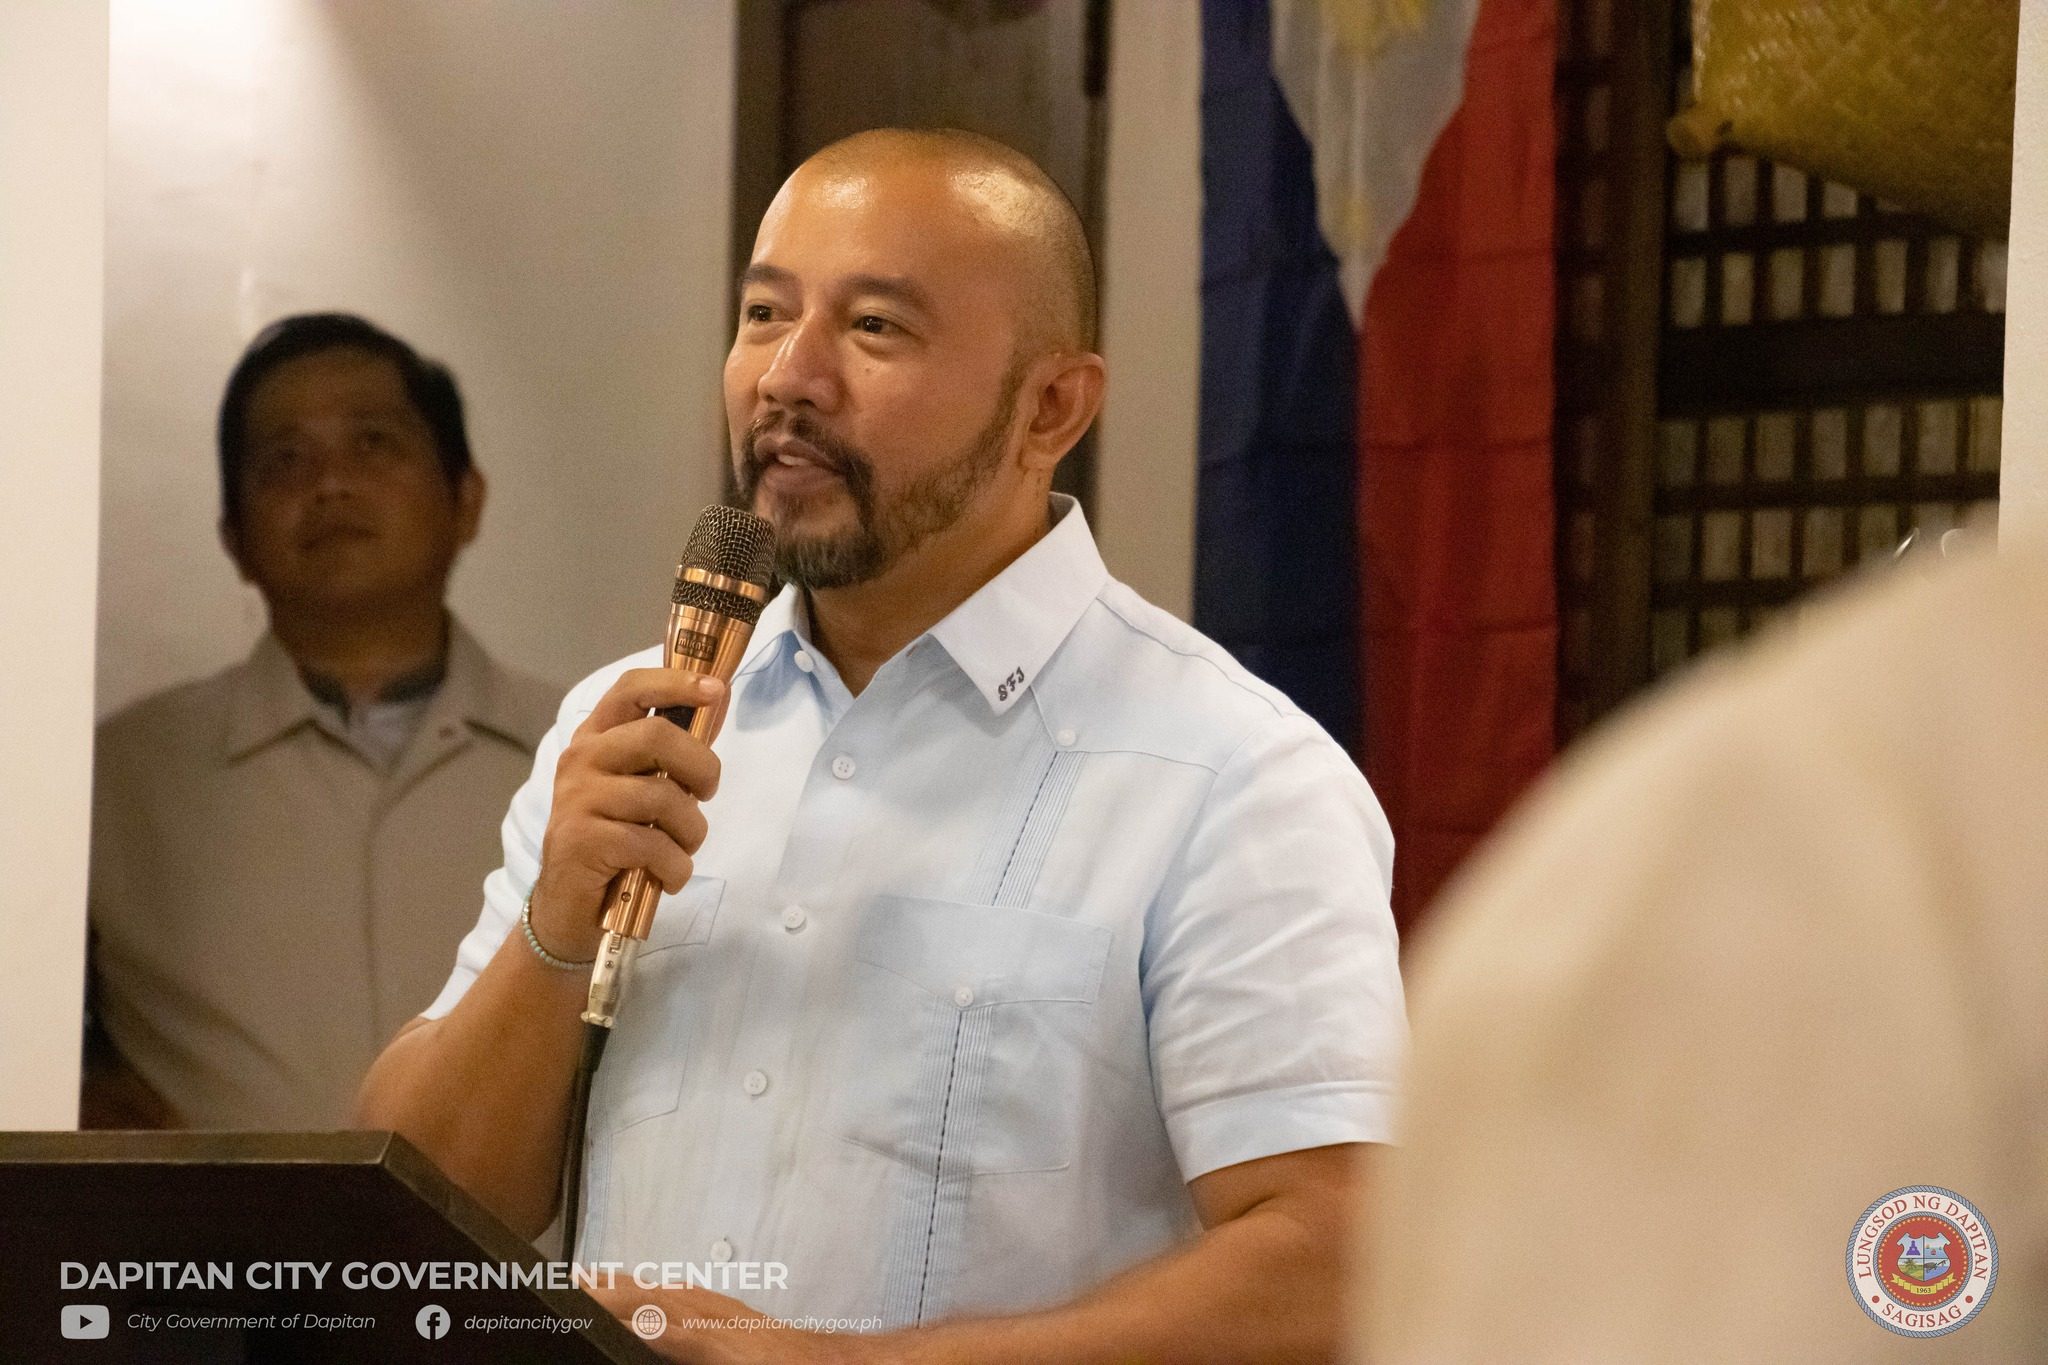 EXPLAINER: Can Mayor Bullet Jalosjos concurrently work as TAPE executive?